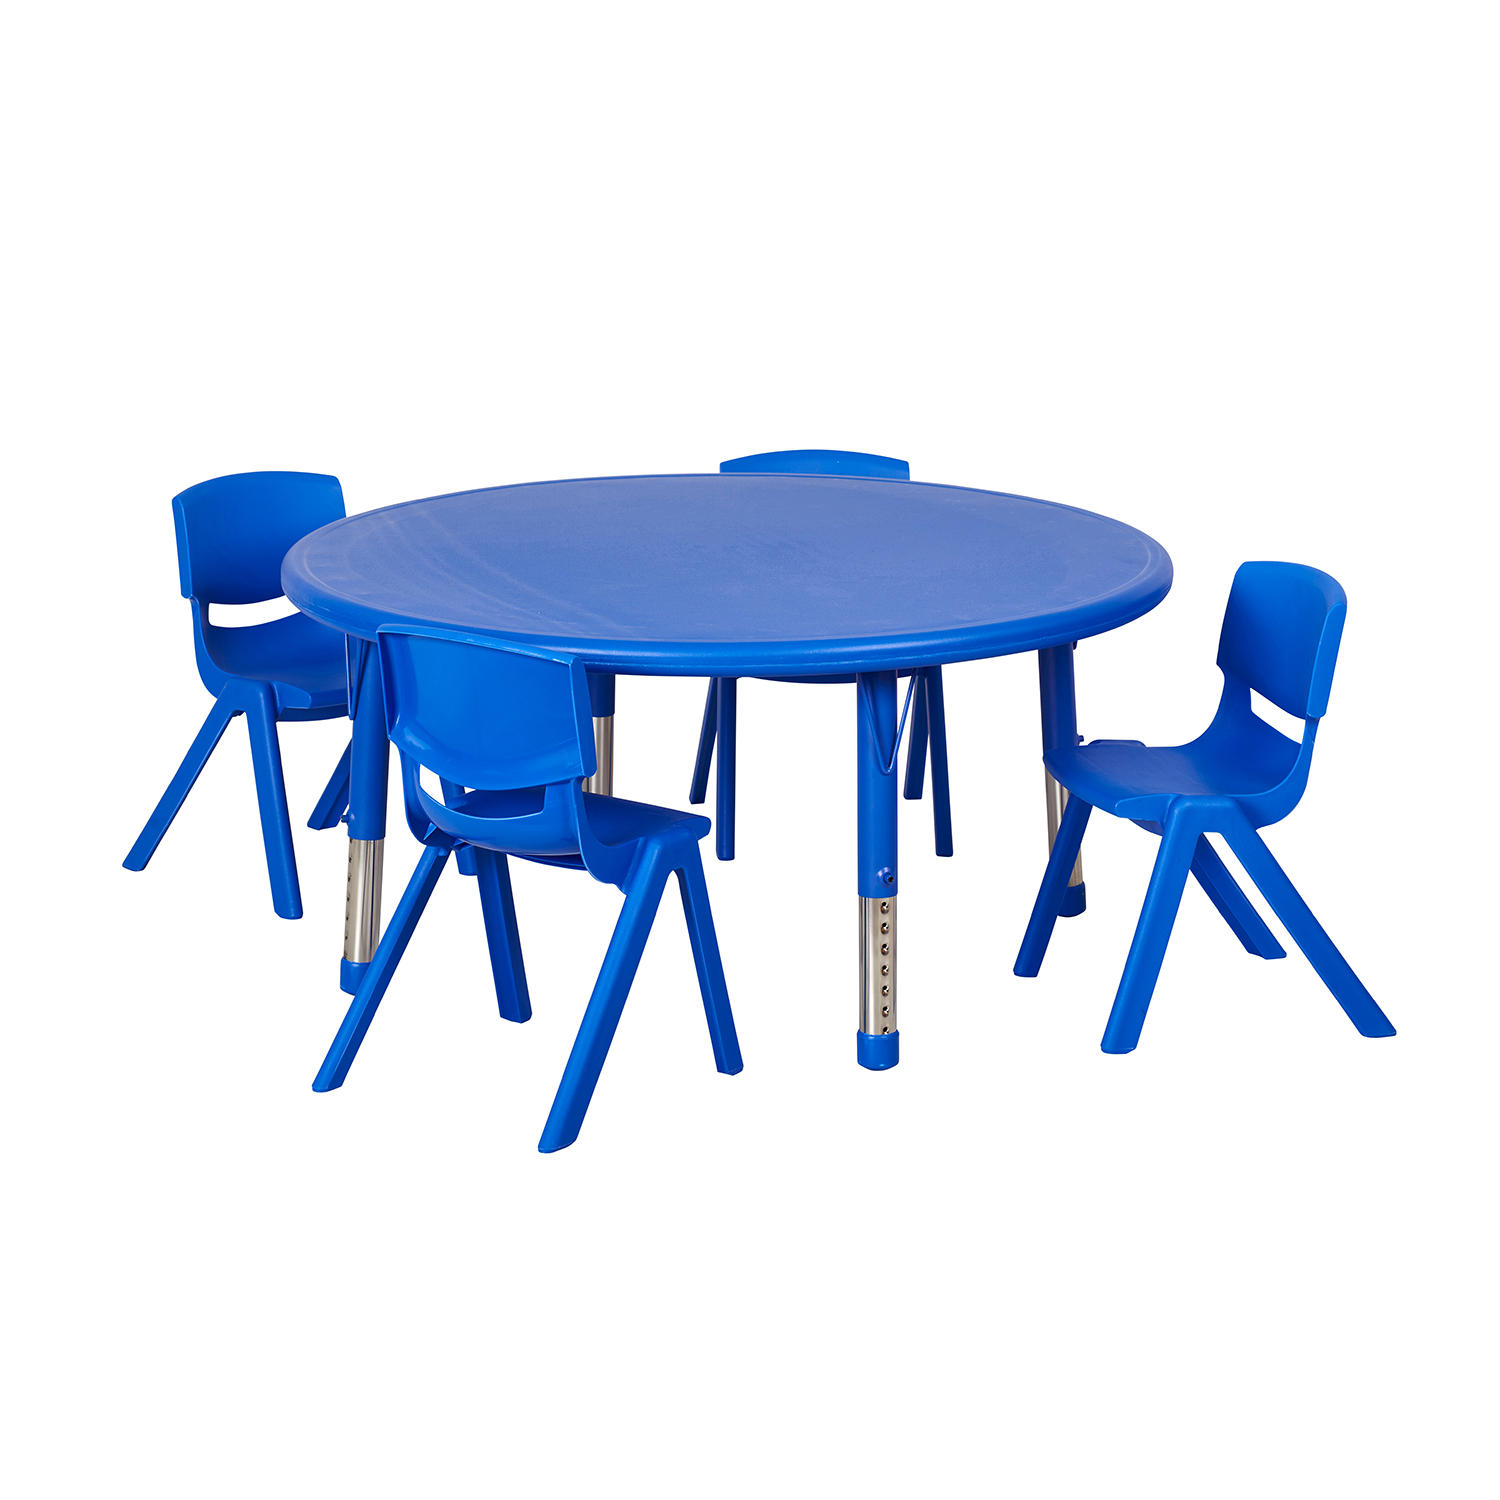 ECR4Kids 45' Round Resin Table with Matching 16' Chairs, Blue